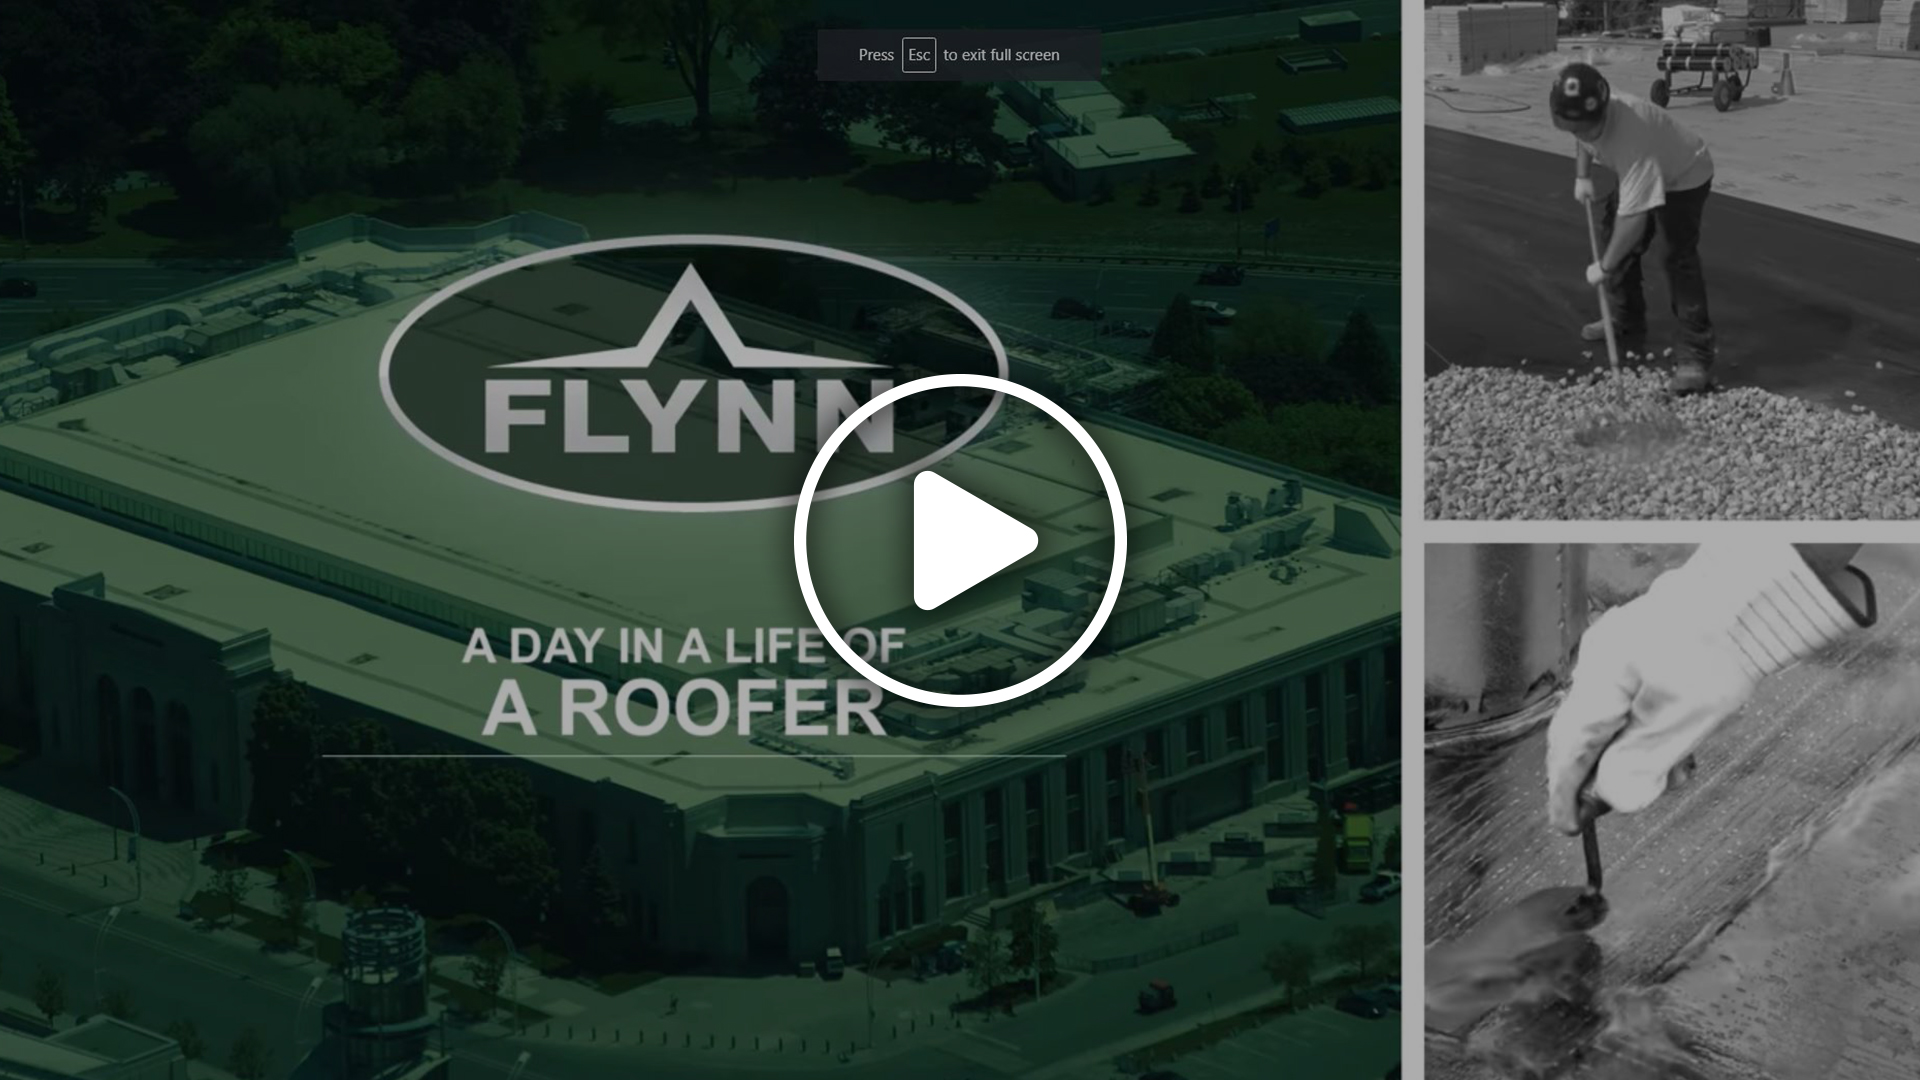 A Day in the Life of a Flynn Roofer